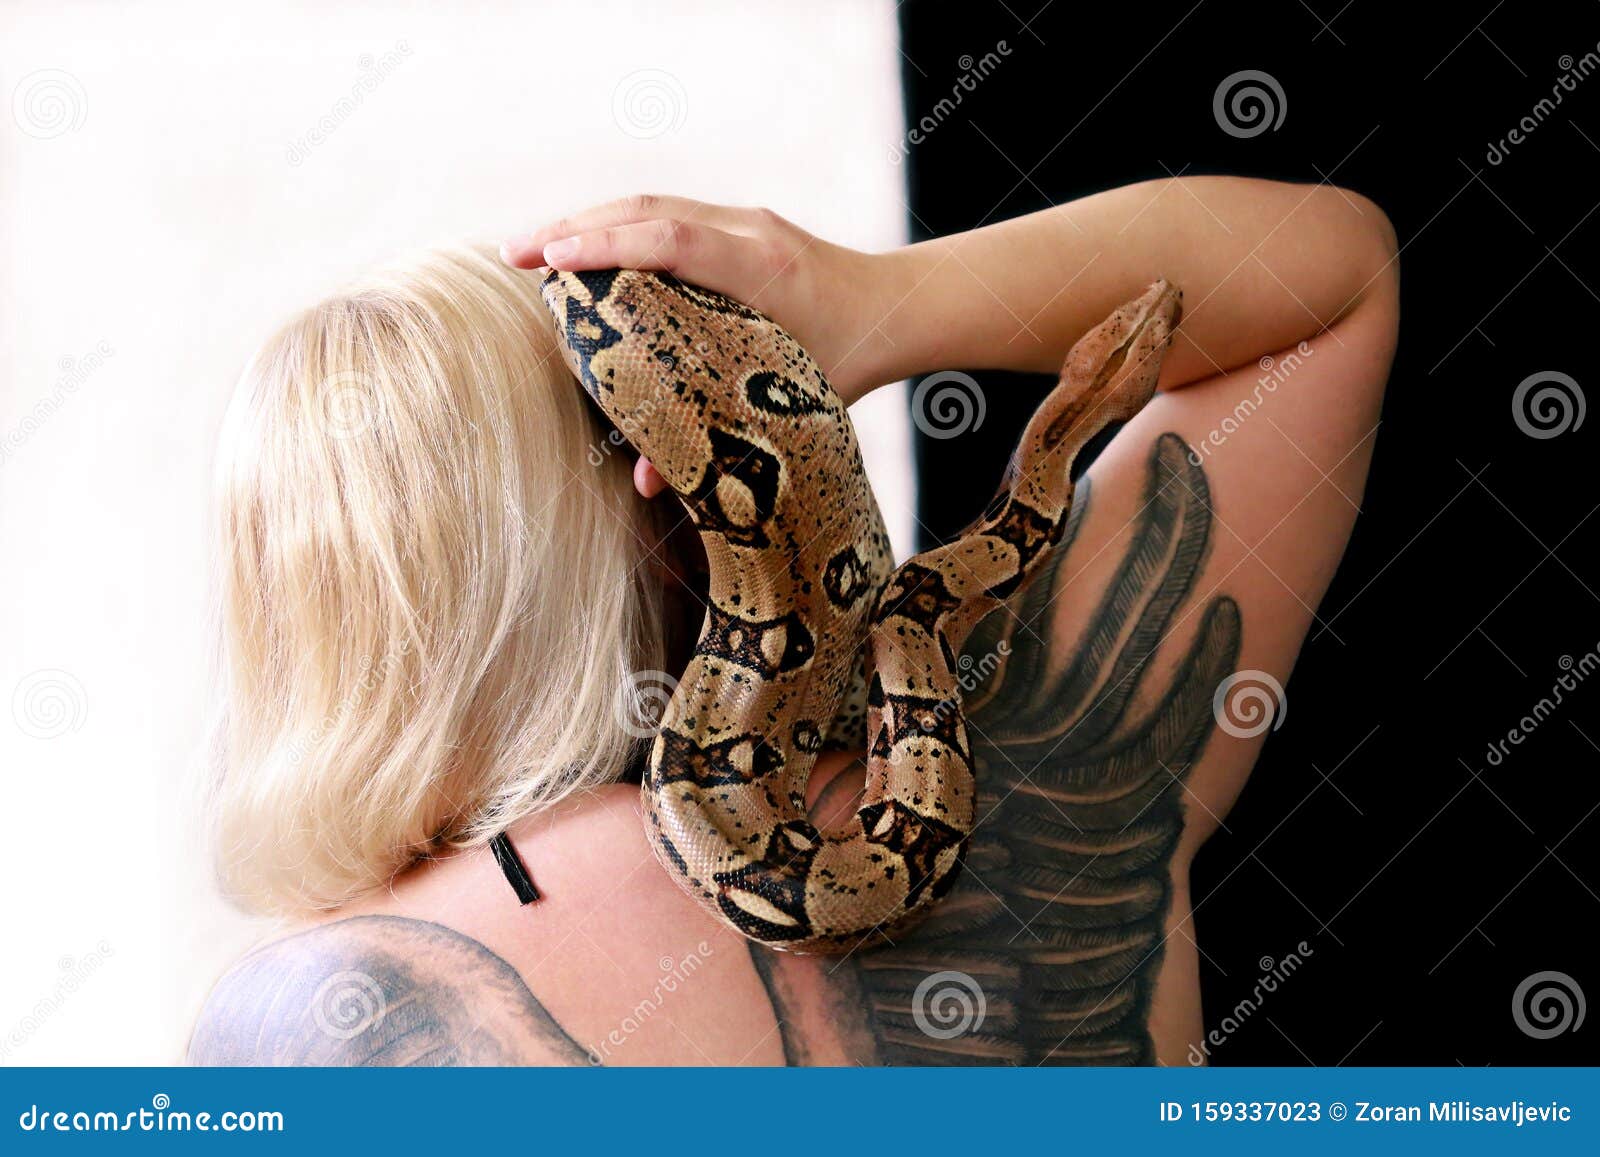 annalena eriksson add naked girls and snakes photo